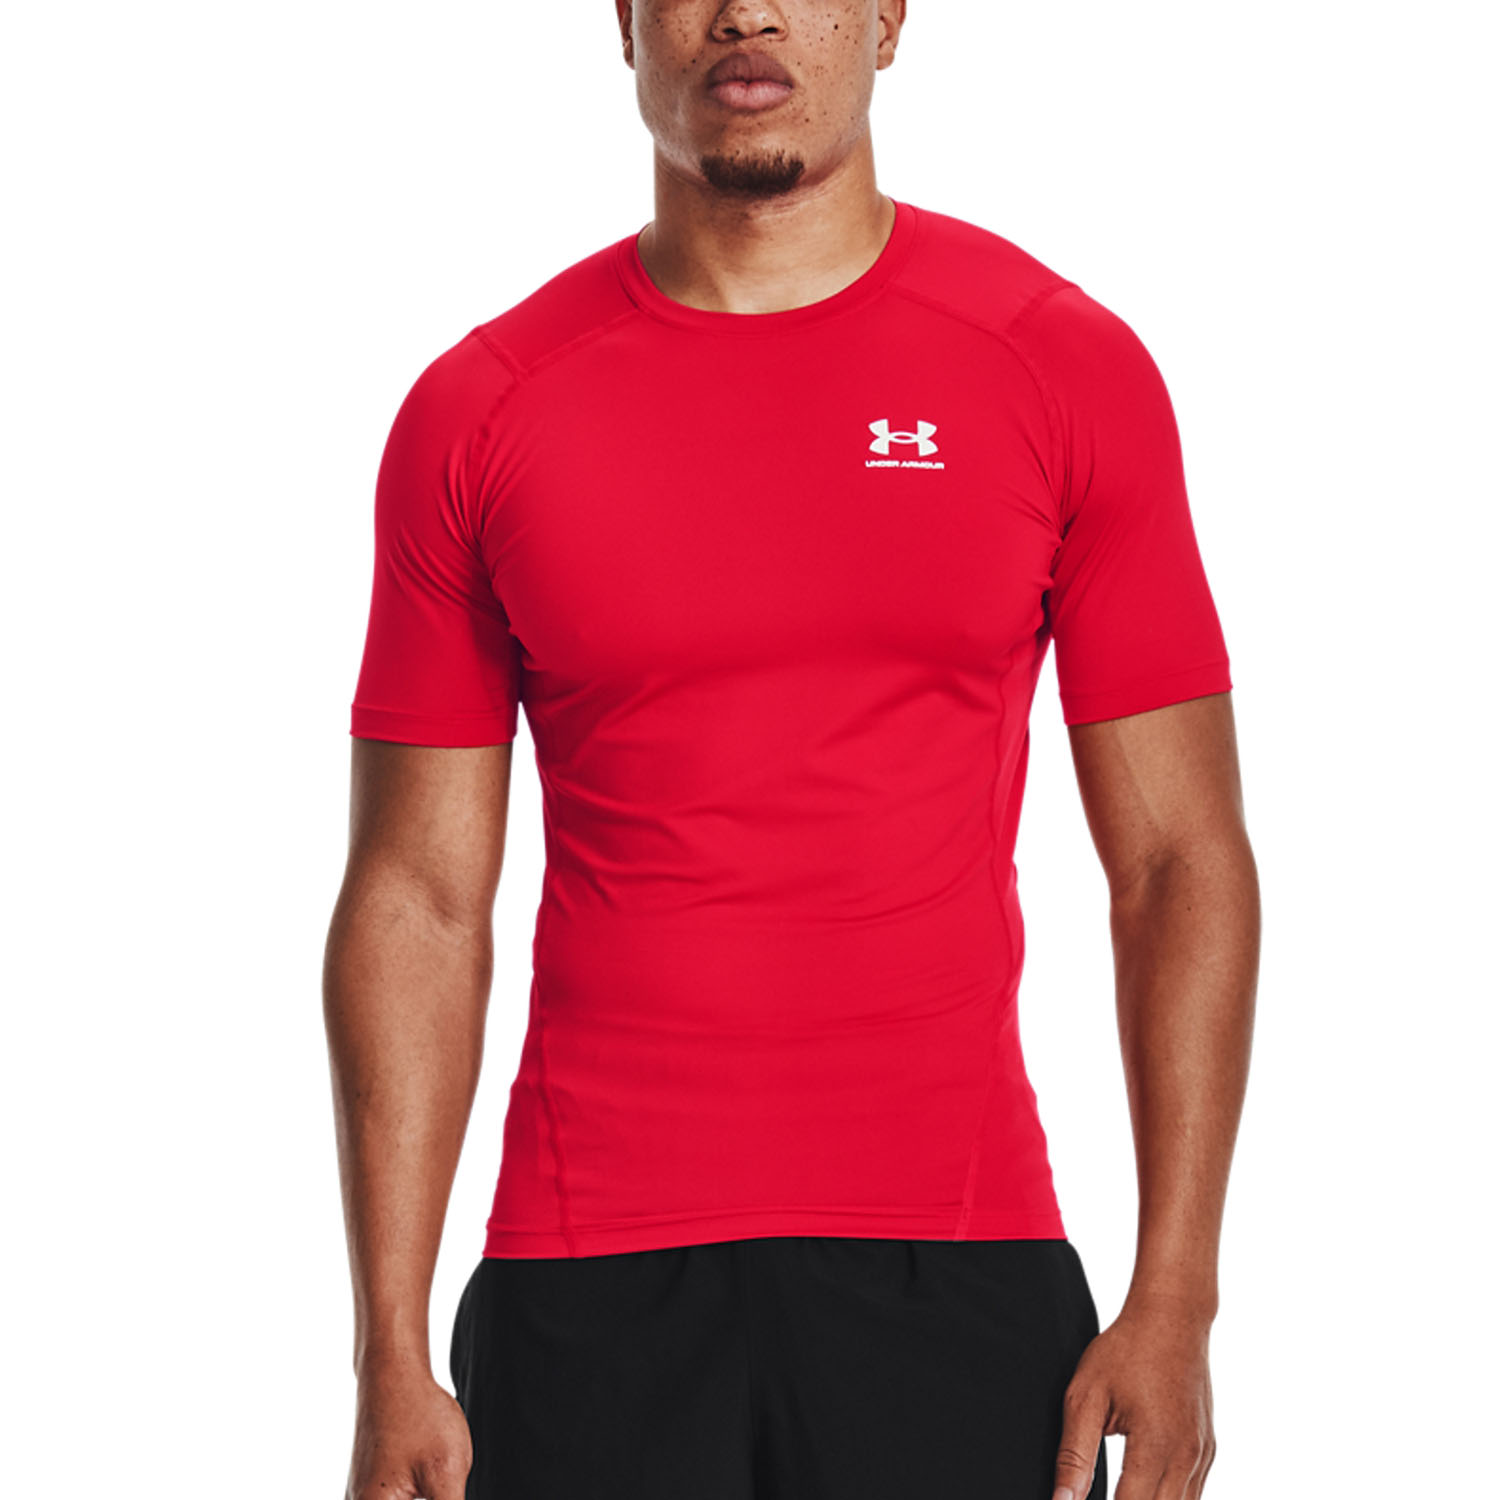 Under Armour HeatGear Compression T-Shirt - Red/White